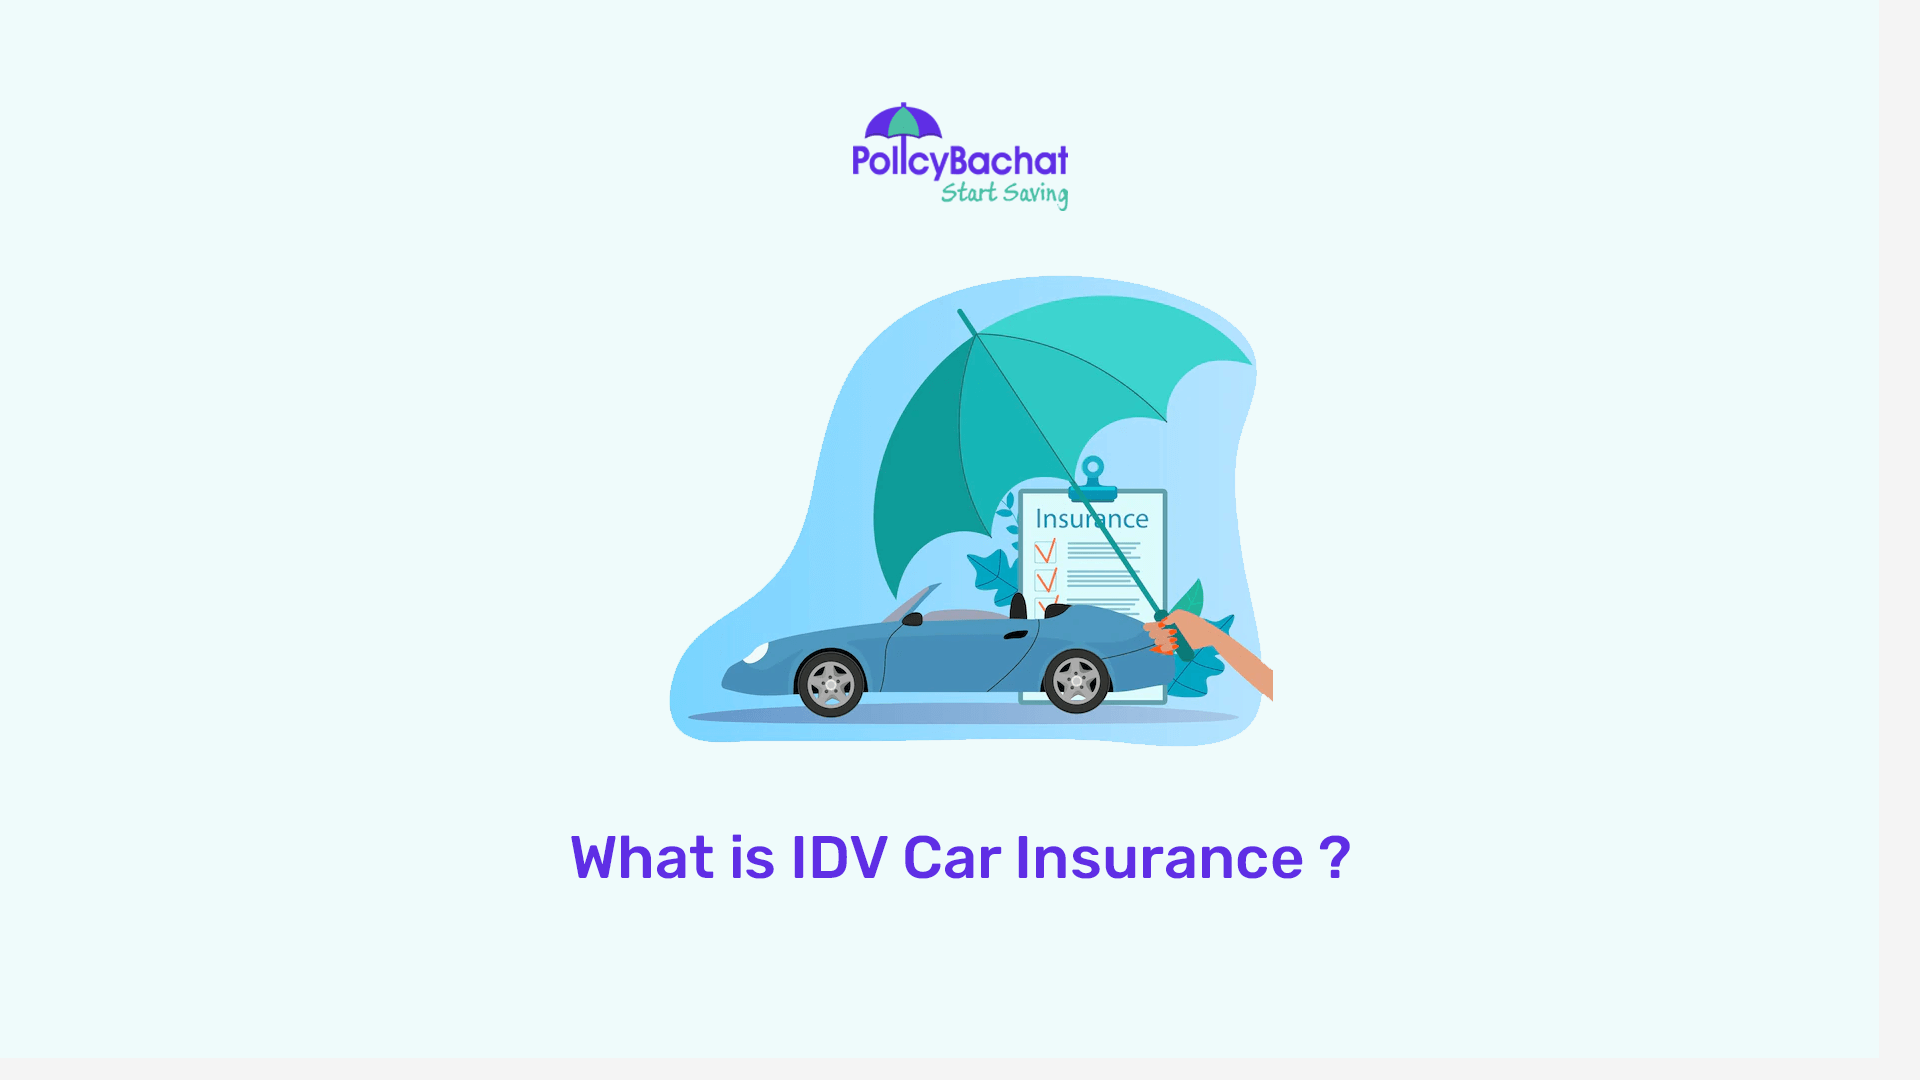 What is IDV Car Insurance? PolicyBachat